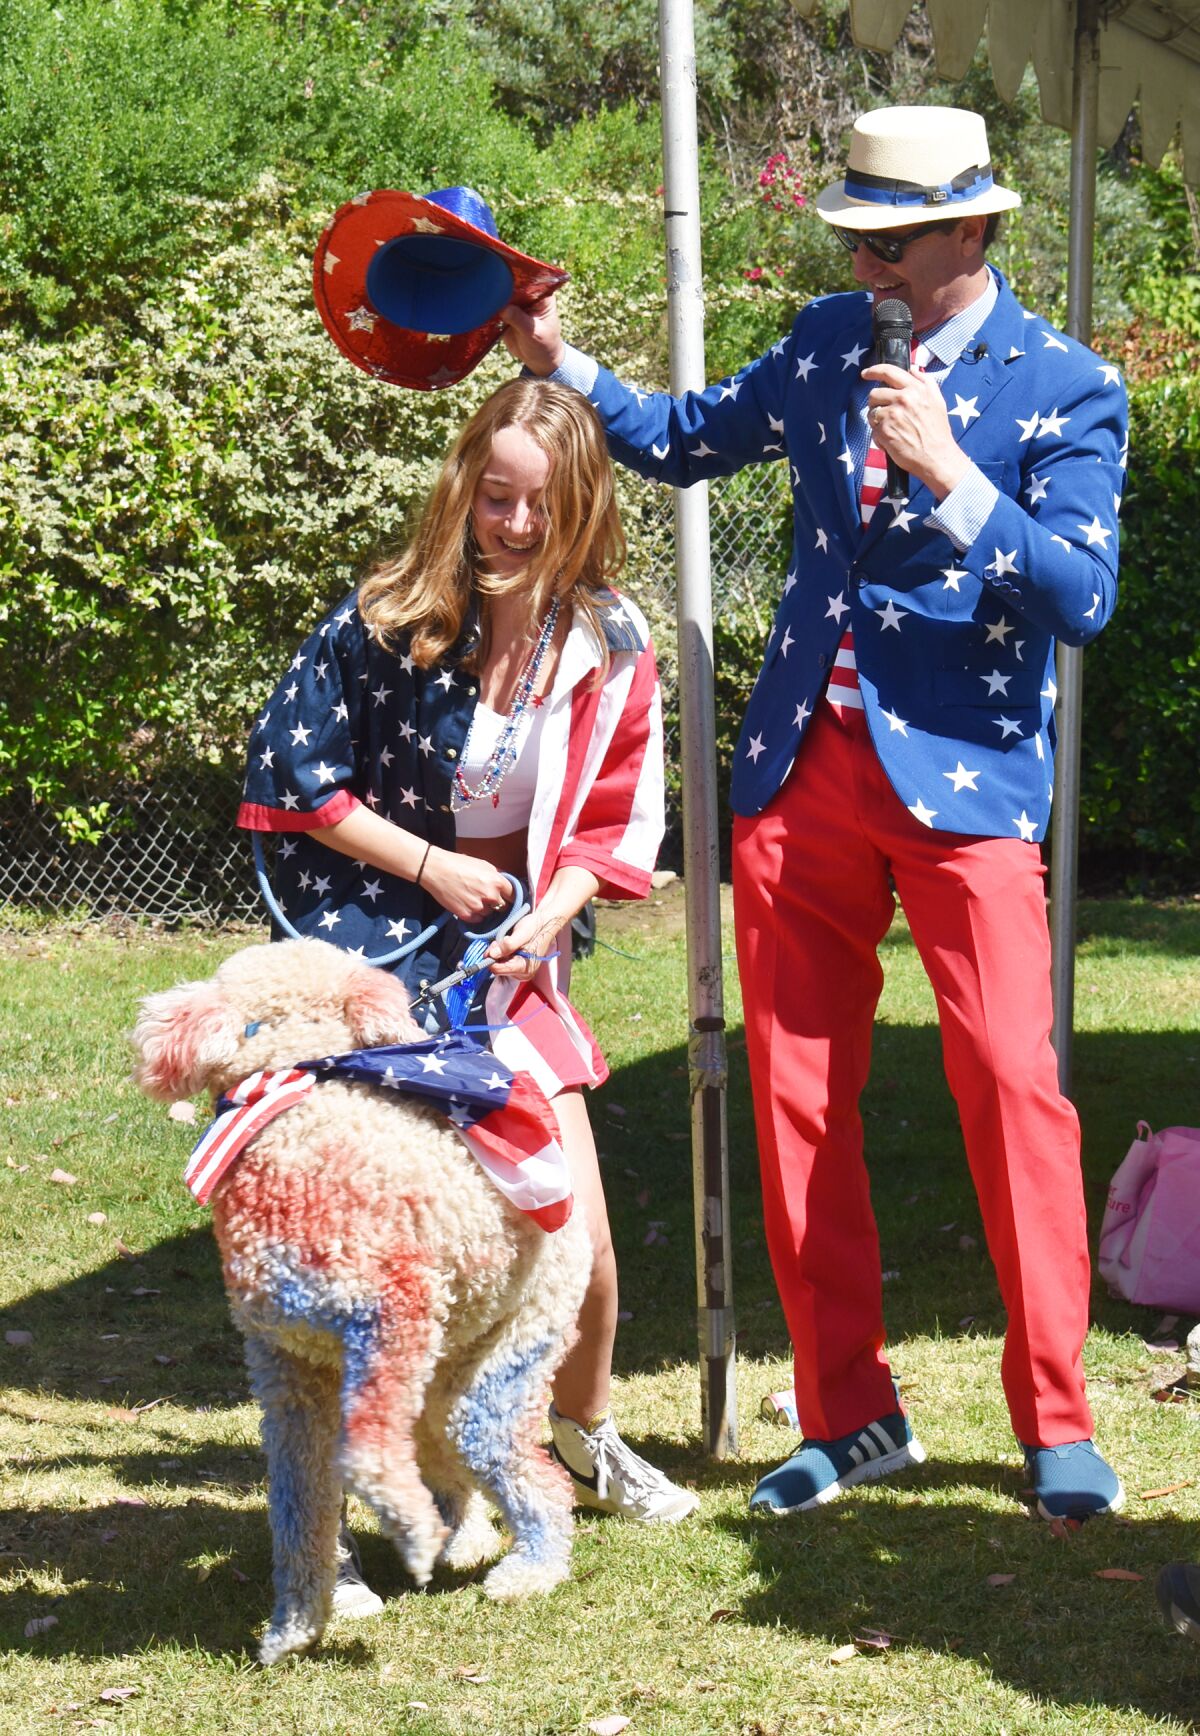 Brianne Zevely and her father, Jeff Zevely, entertained the audience with a comedic bit about their dog, Raleigh.